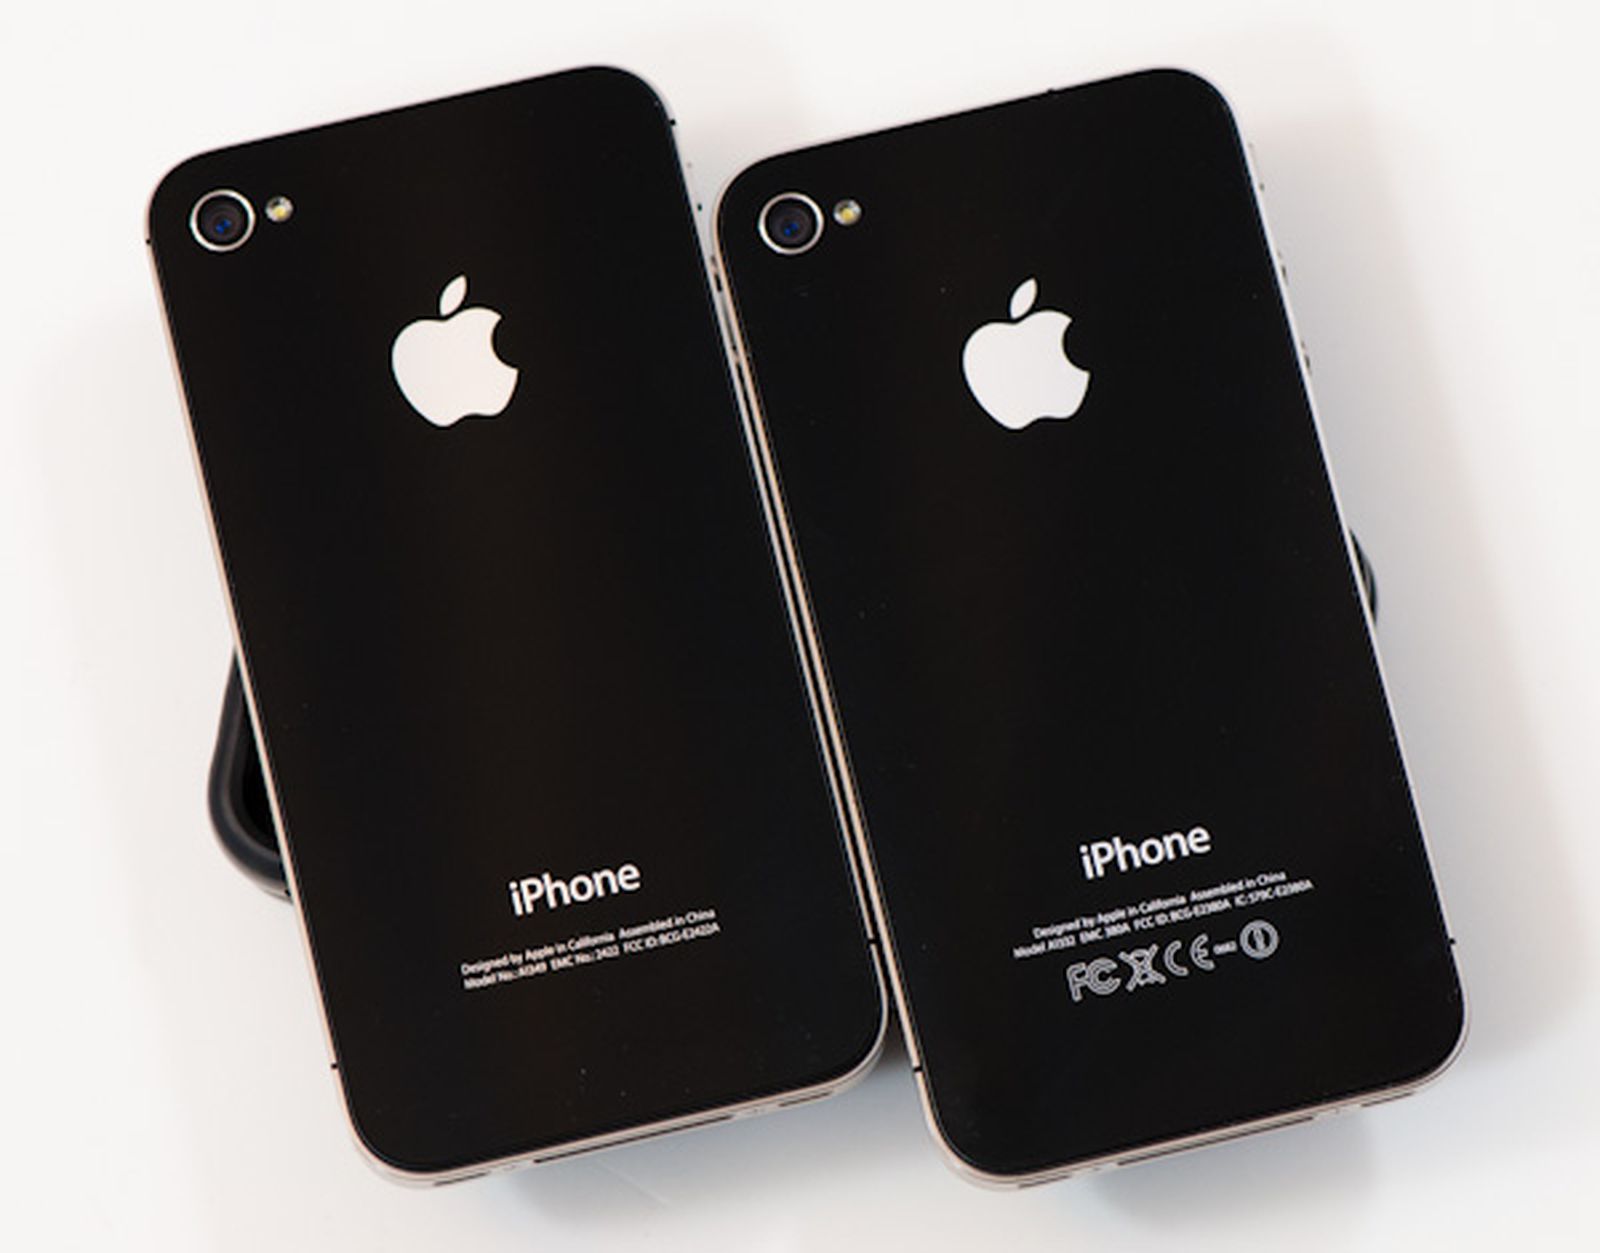 Apple May No Longer Be Required to Etch FCC Labels on iPhone